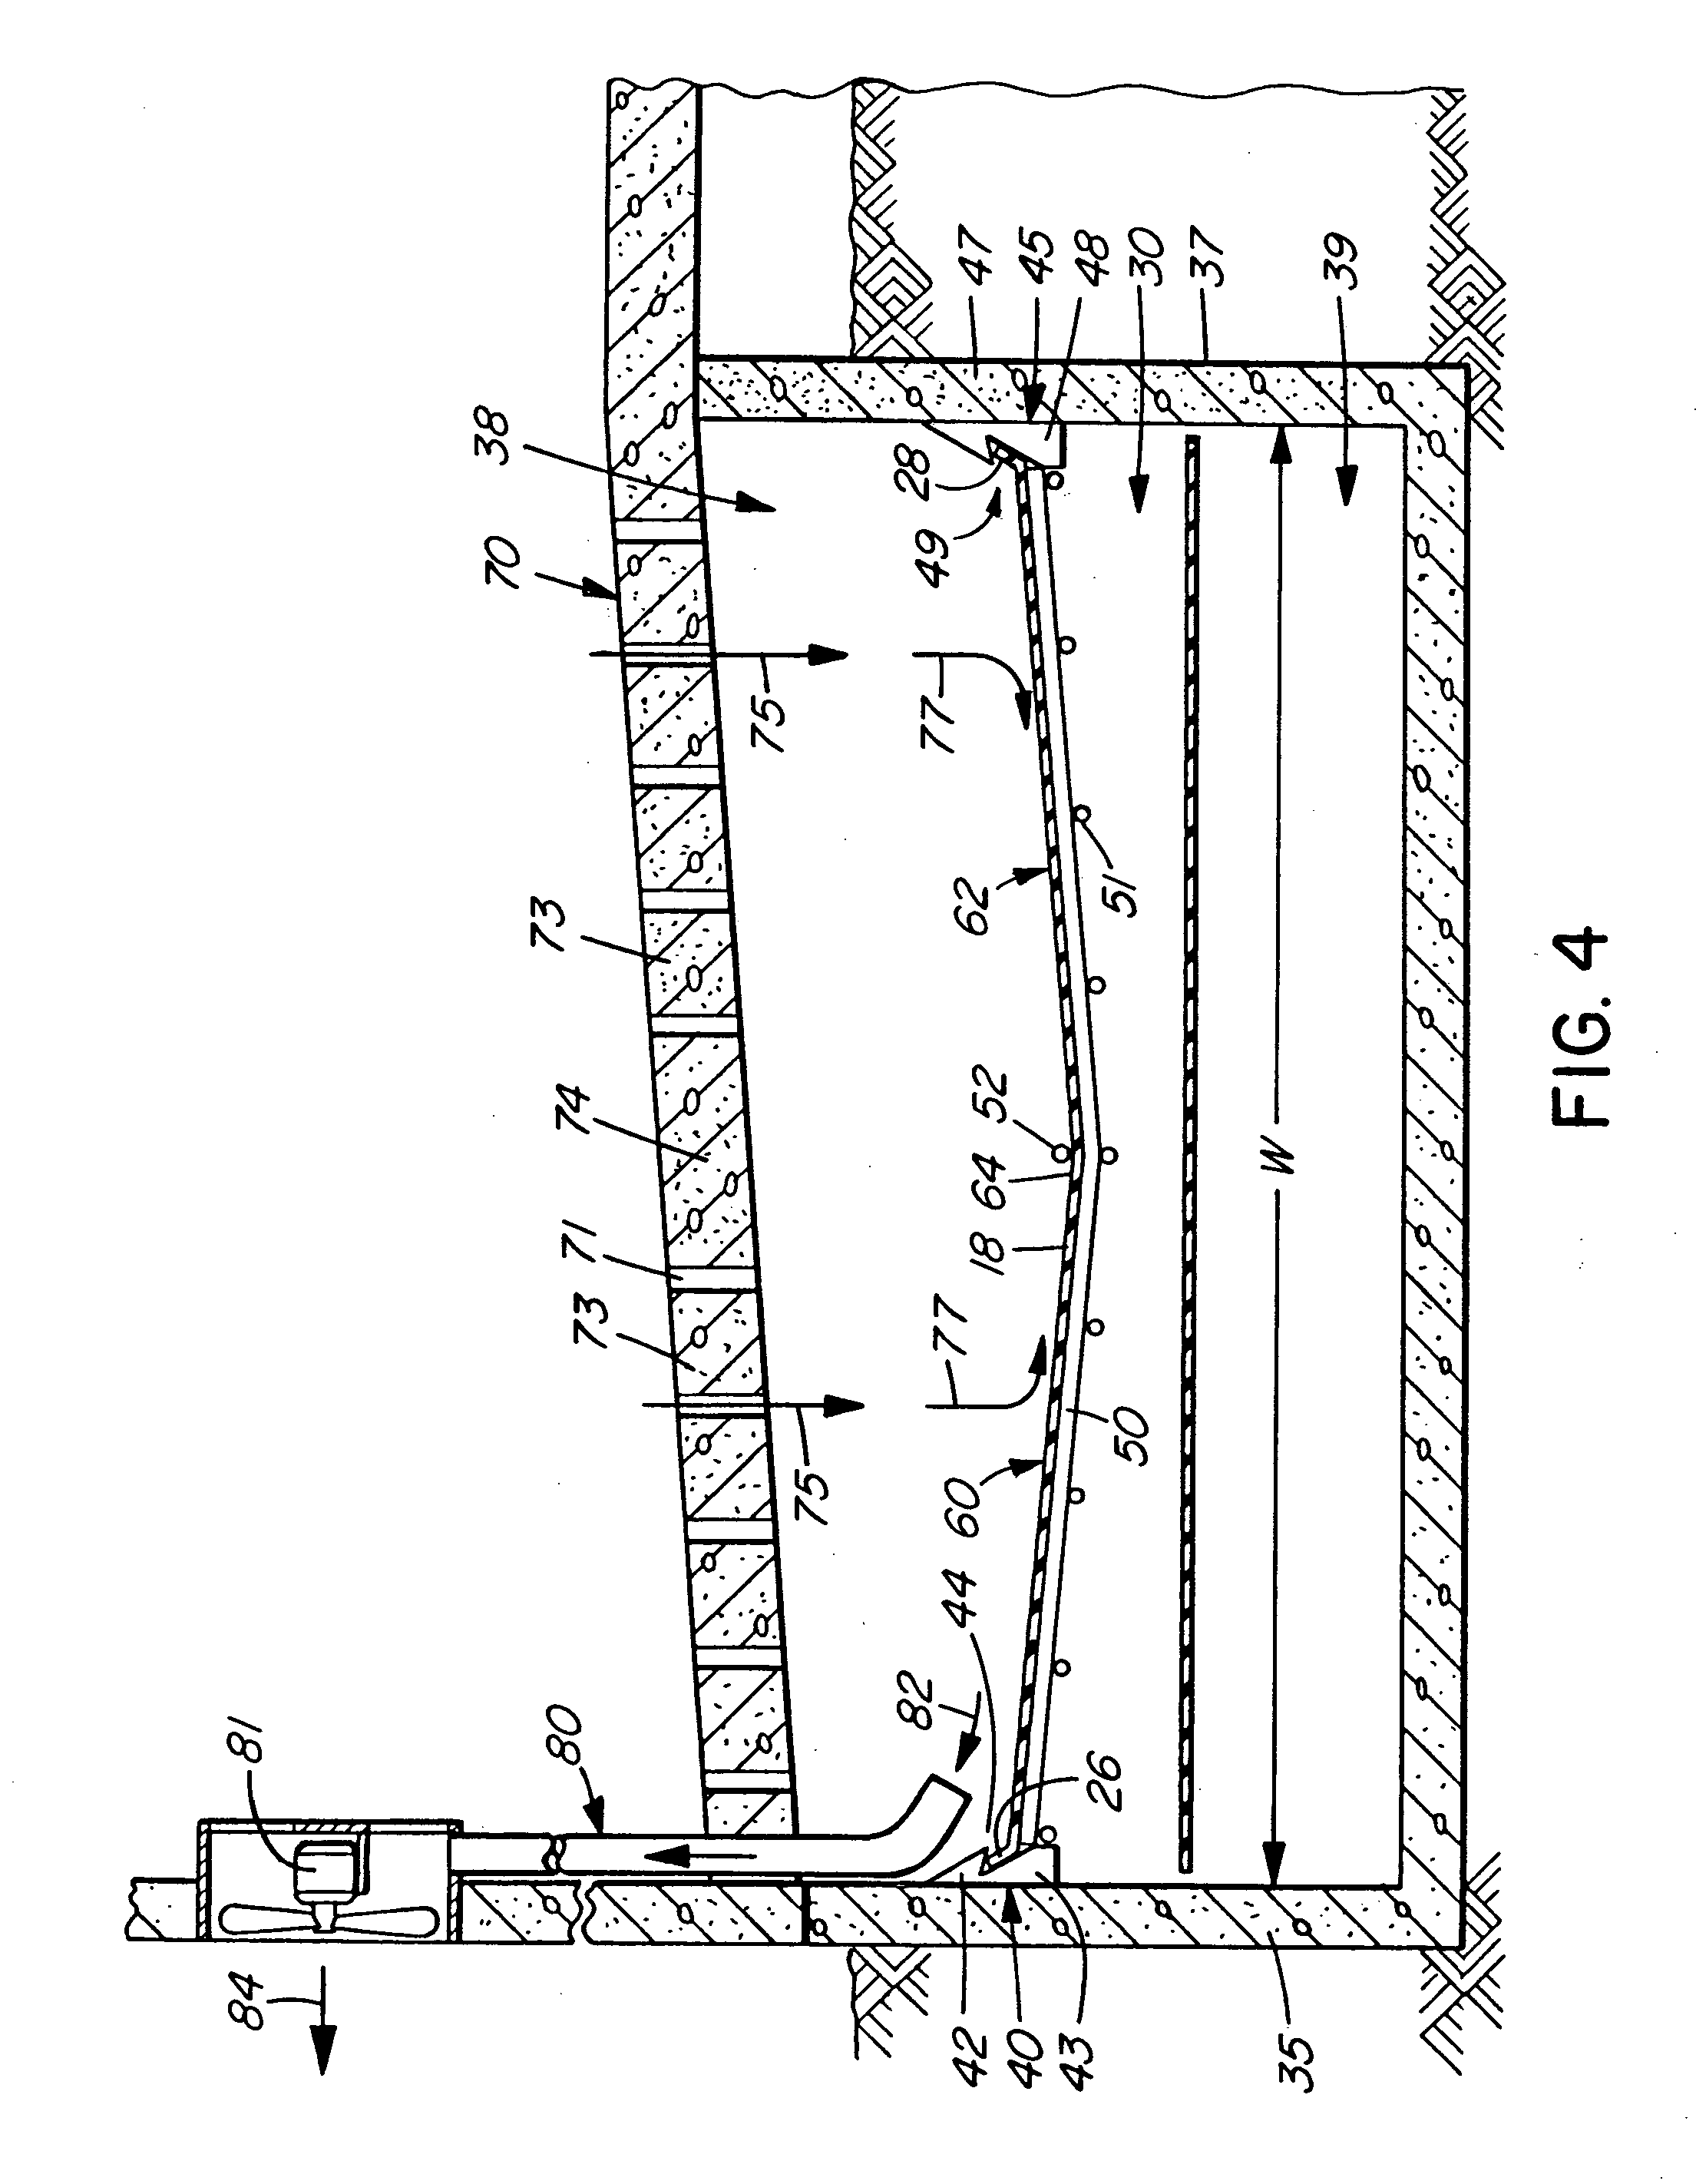 Waste collection system for separating liquid waste from solid waste